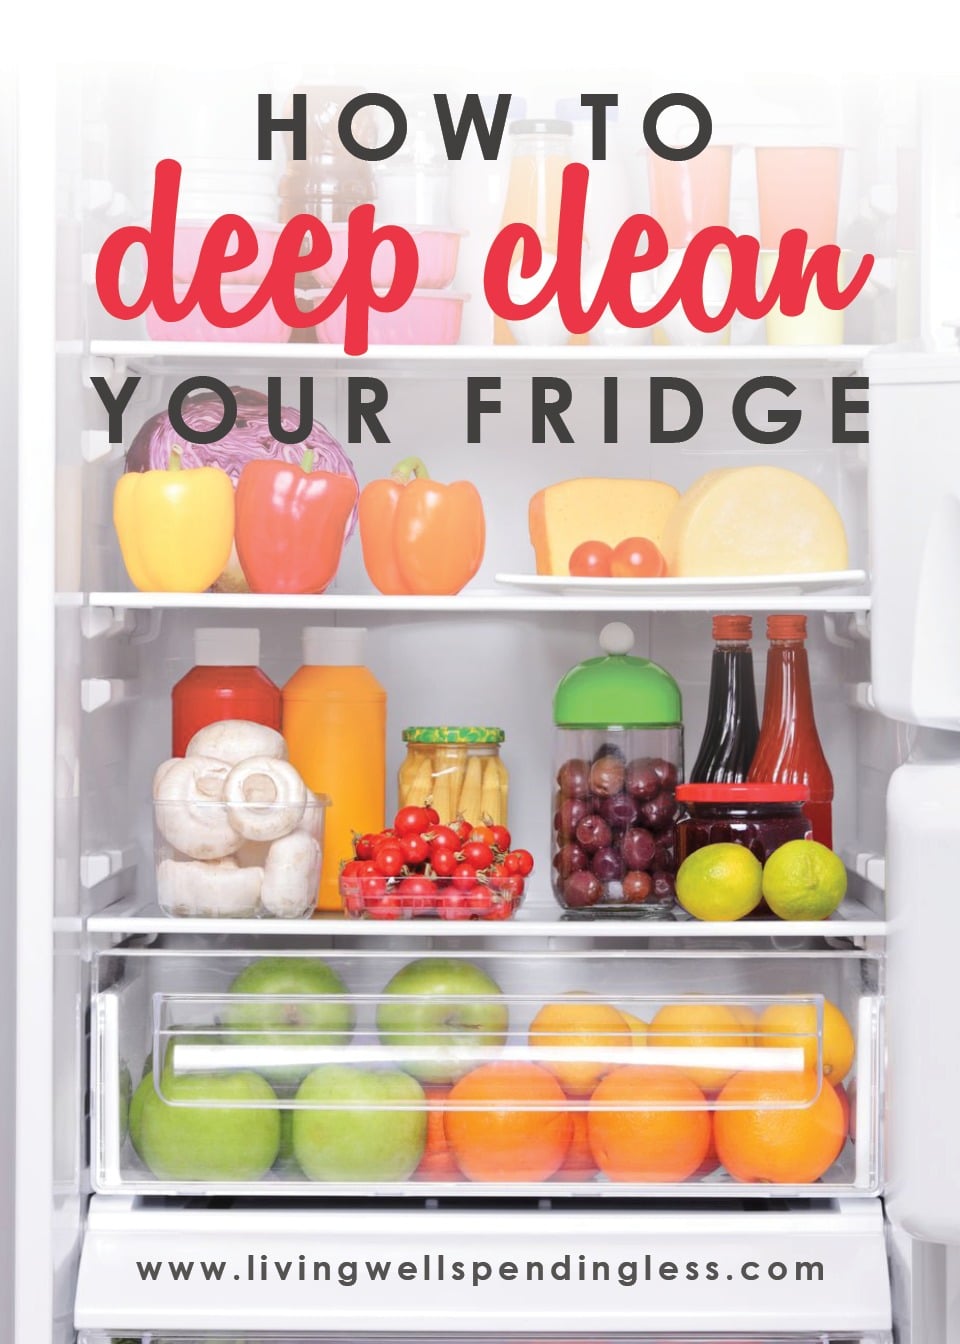 Is your refrigerator looking a little dirty? It may be time to deep clean your fridge! Keep your fridge squeaky clean with this step-by-step guide.